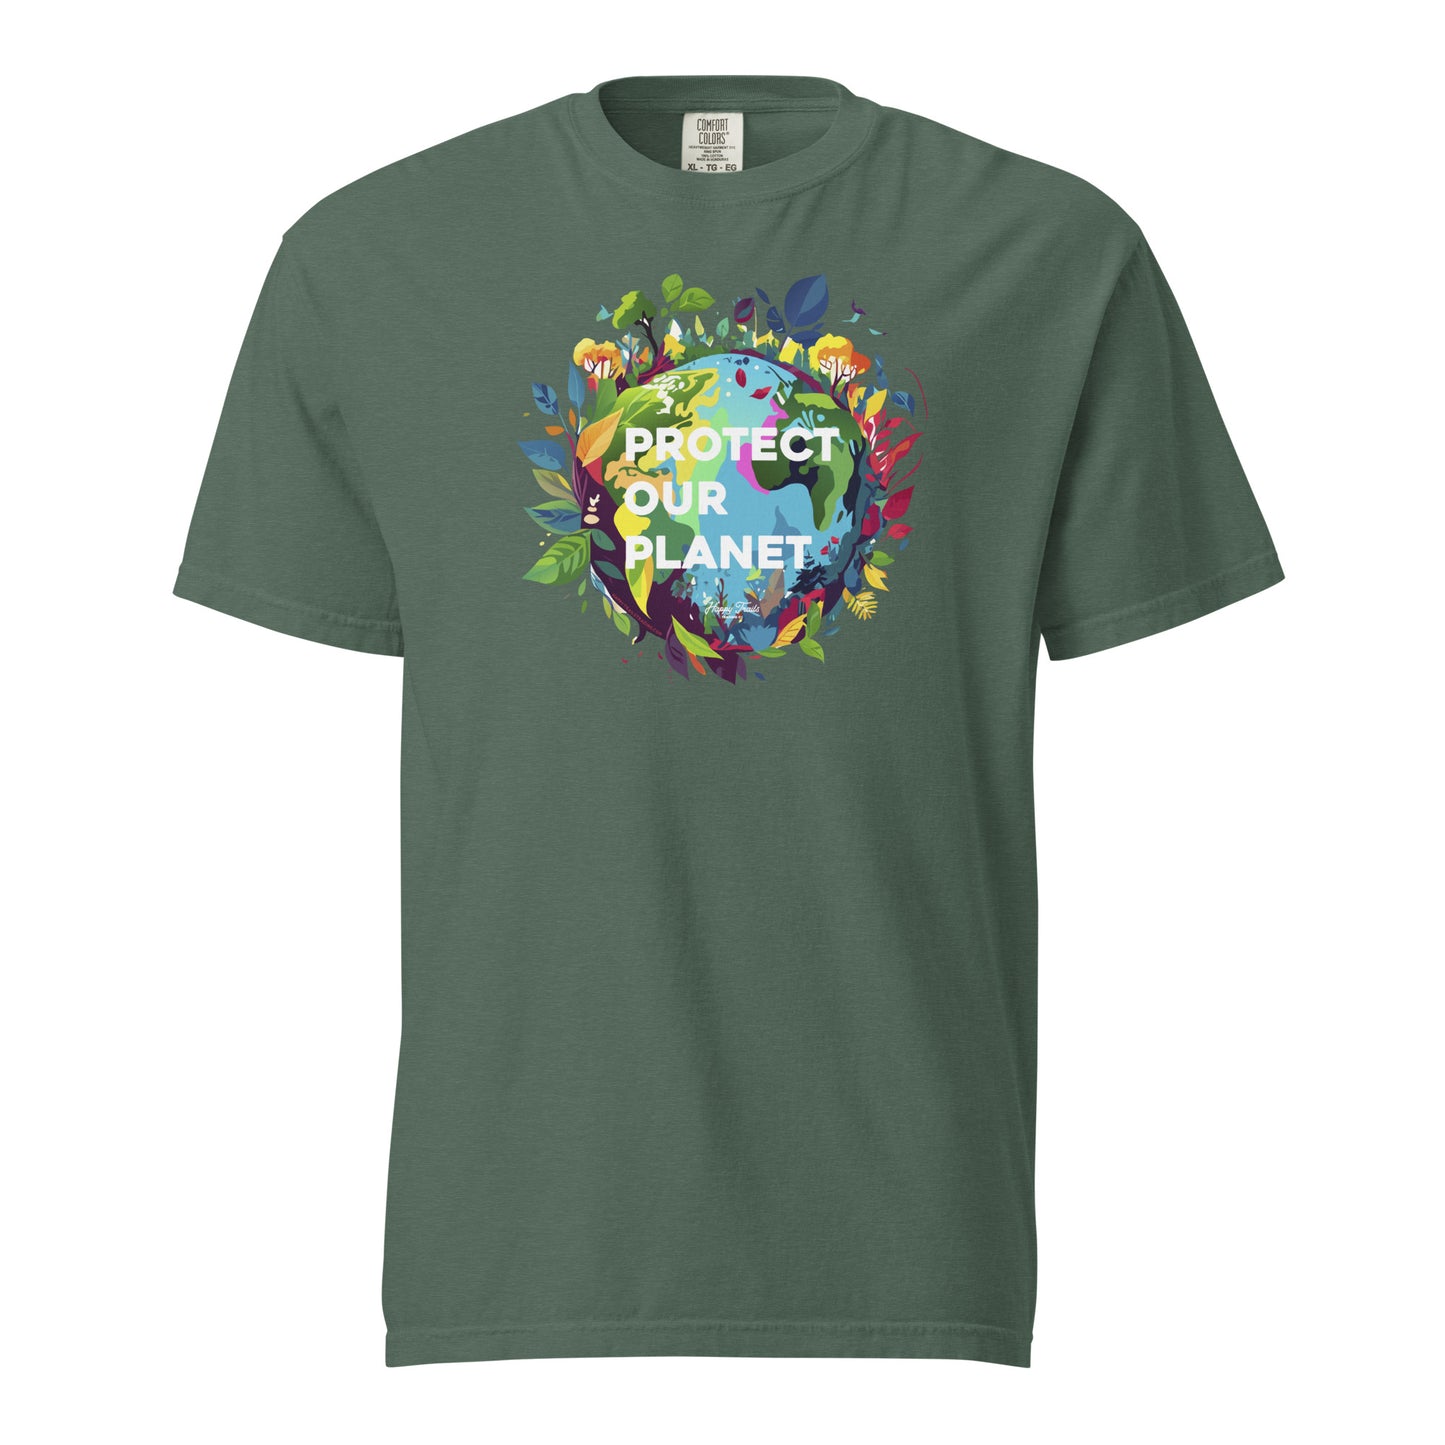 Protect Our Planet - Unisex T-Shirt